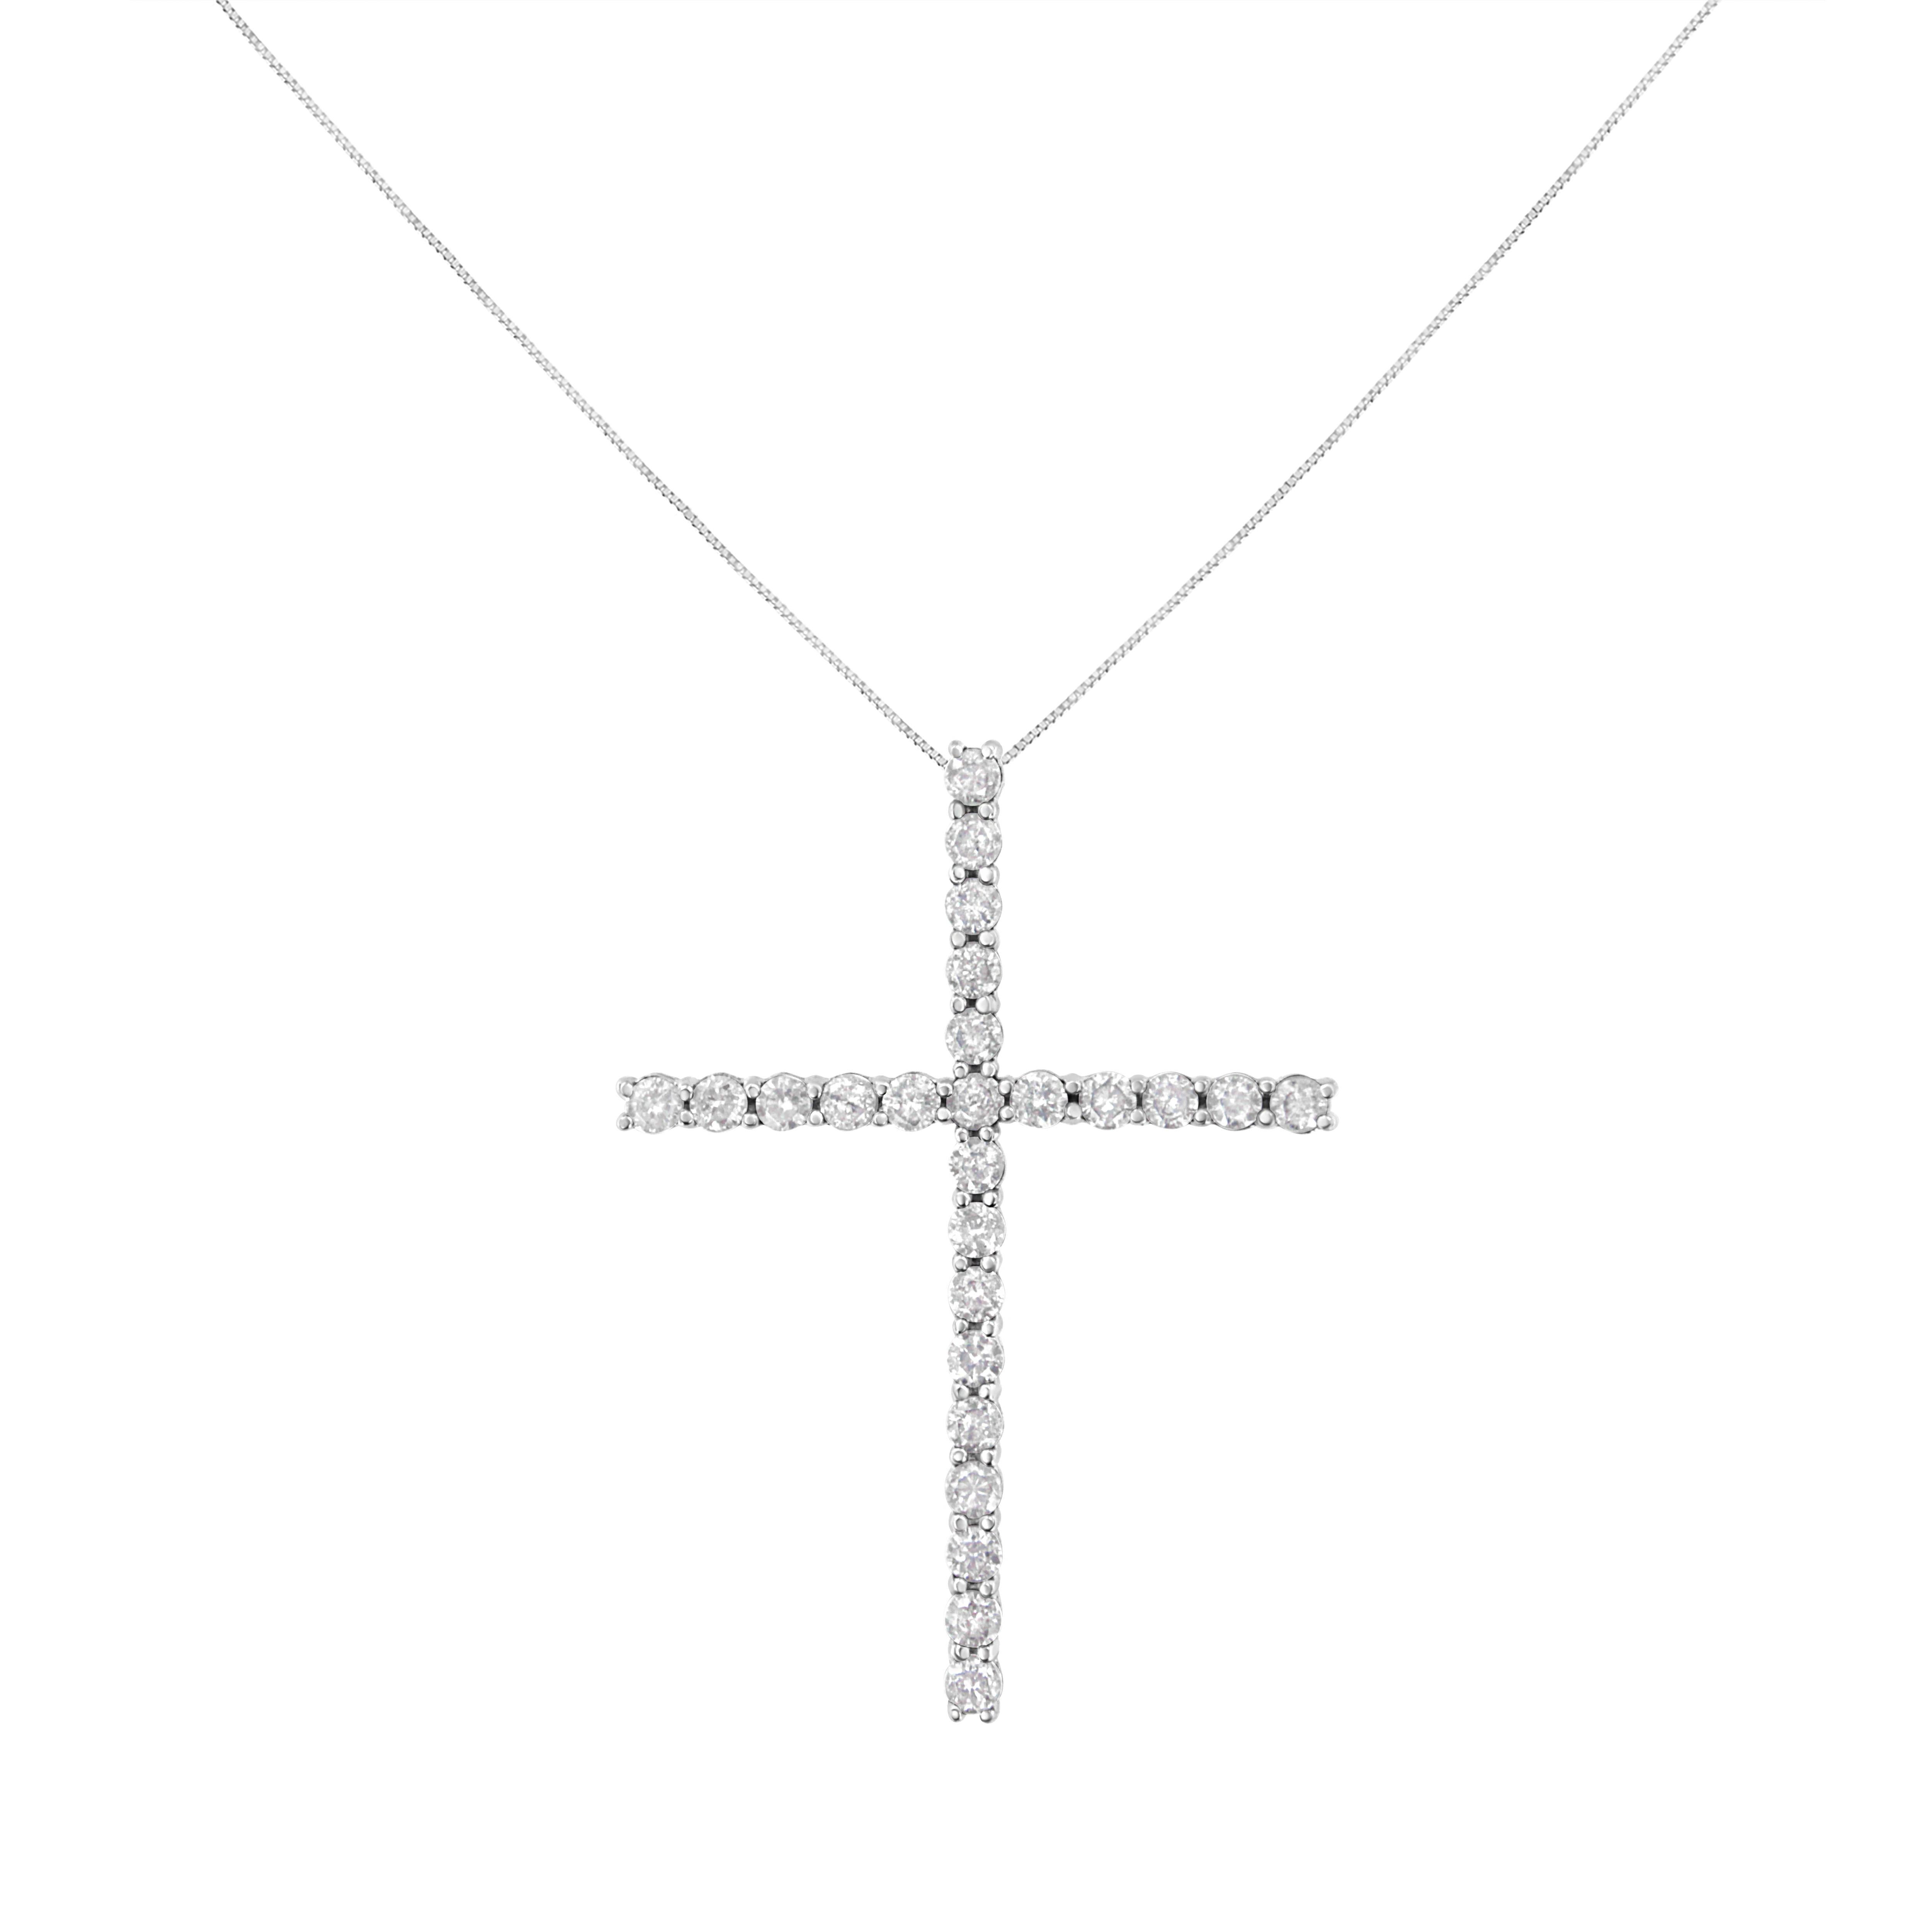 Share your faith with this stunning diamond cross pendant necklace. This cherished cross necklace for her, features 25 natural, round diamonds set in Sterling Silver. The pendant is suspended from an 18-inch box chain with spring ring. This fine